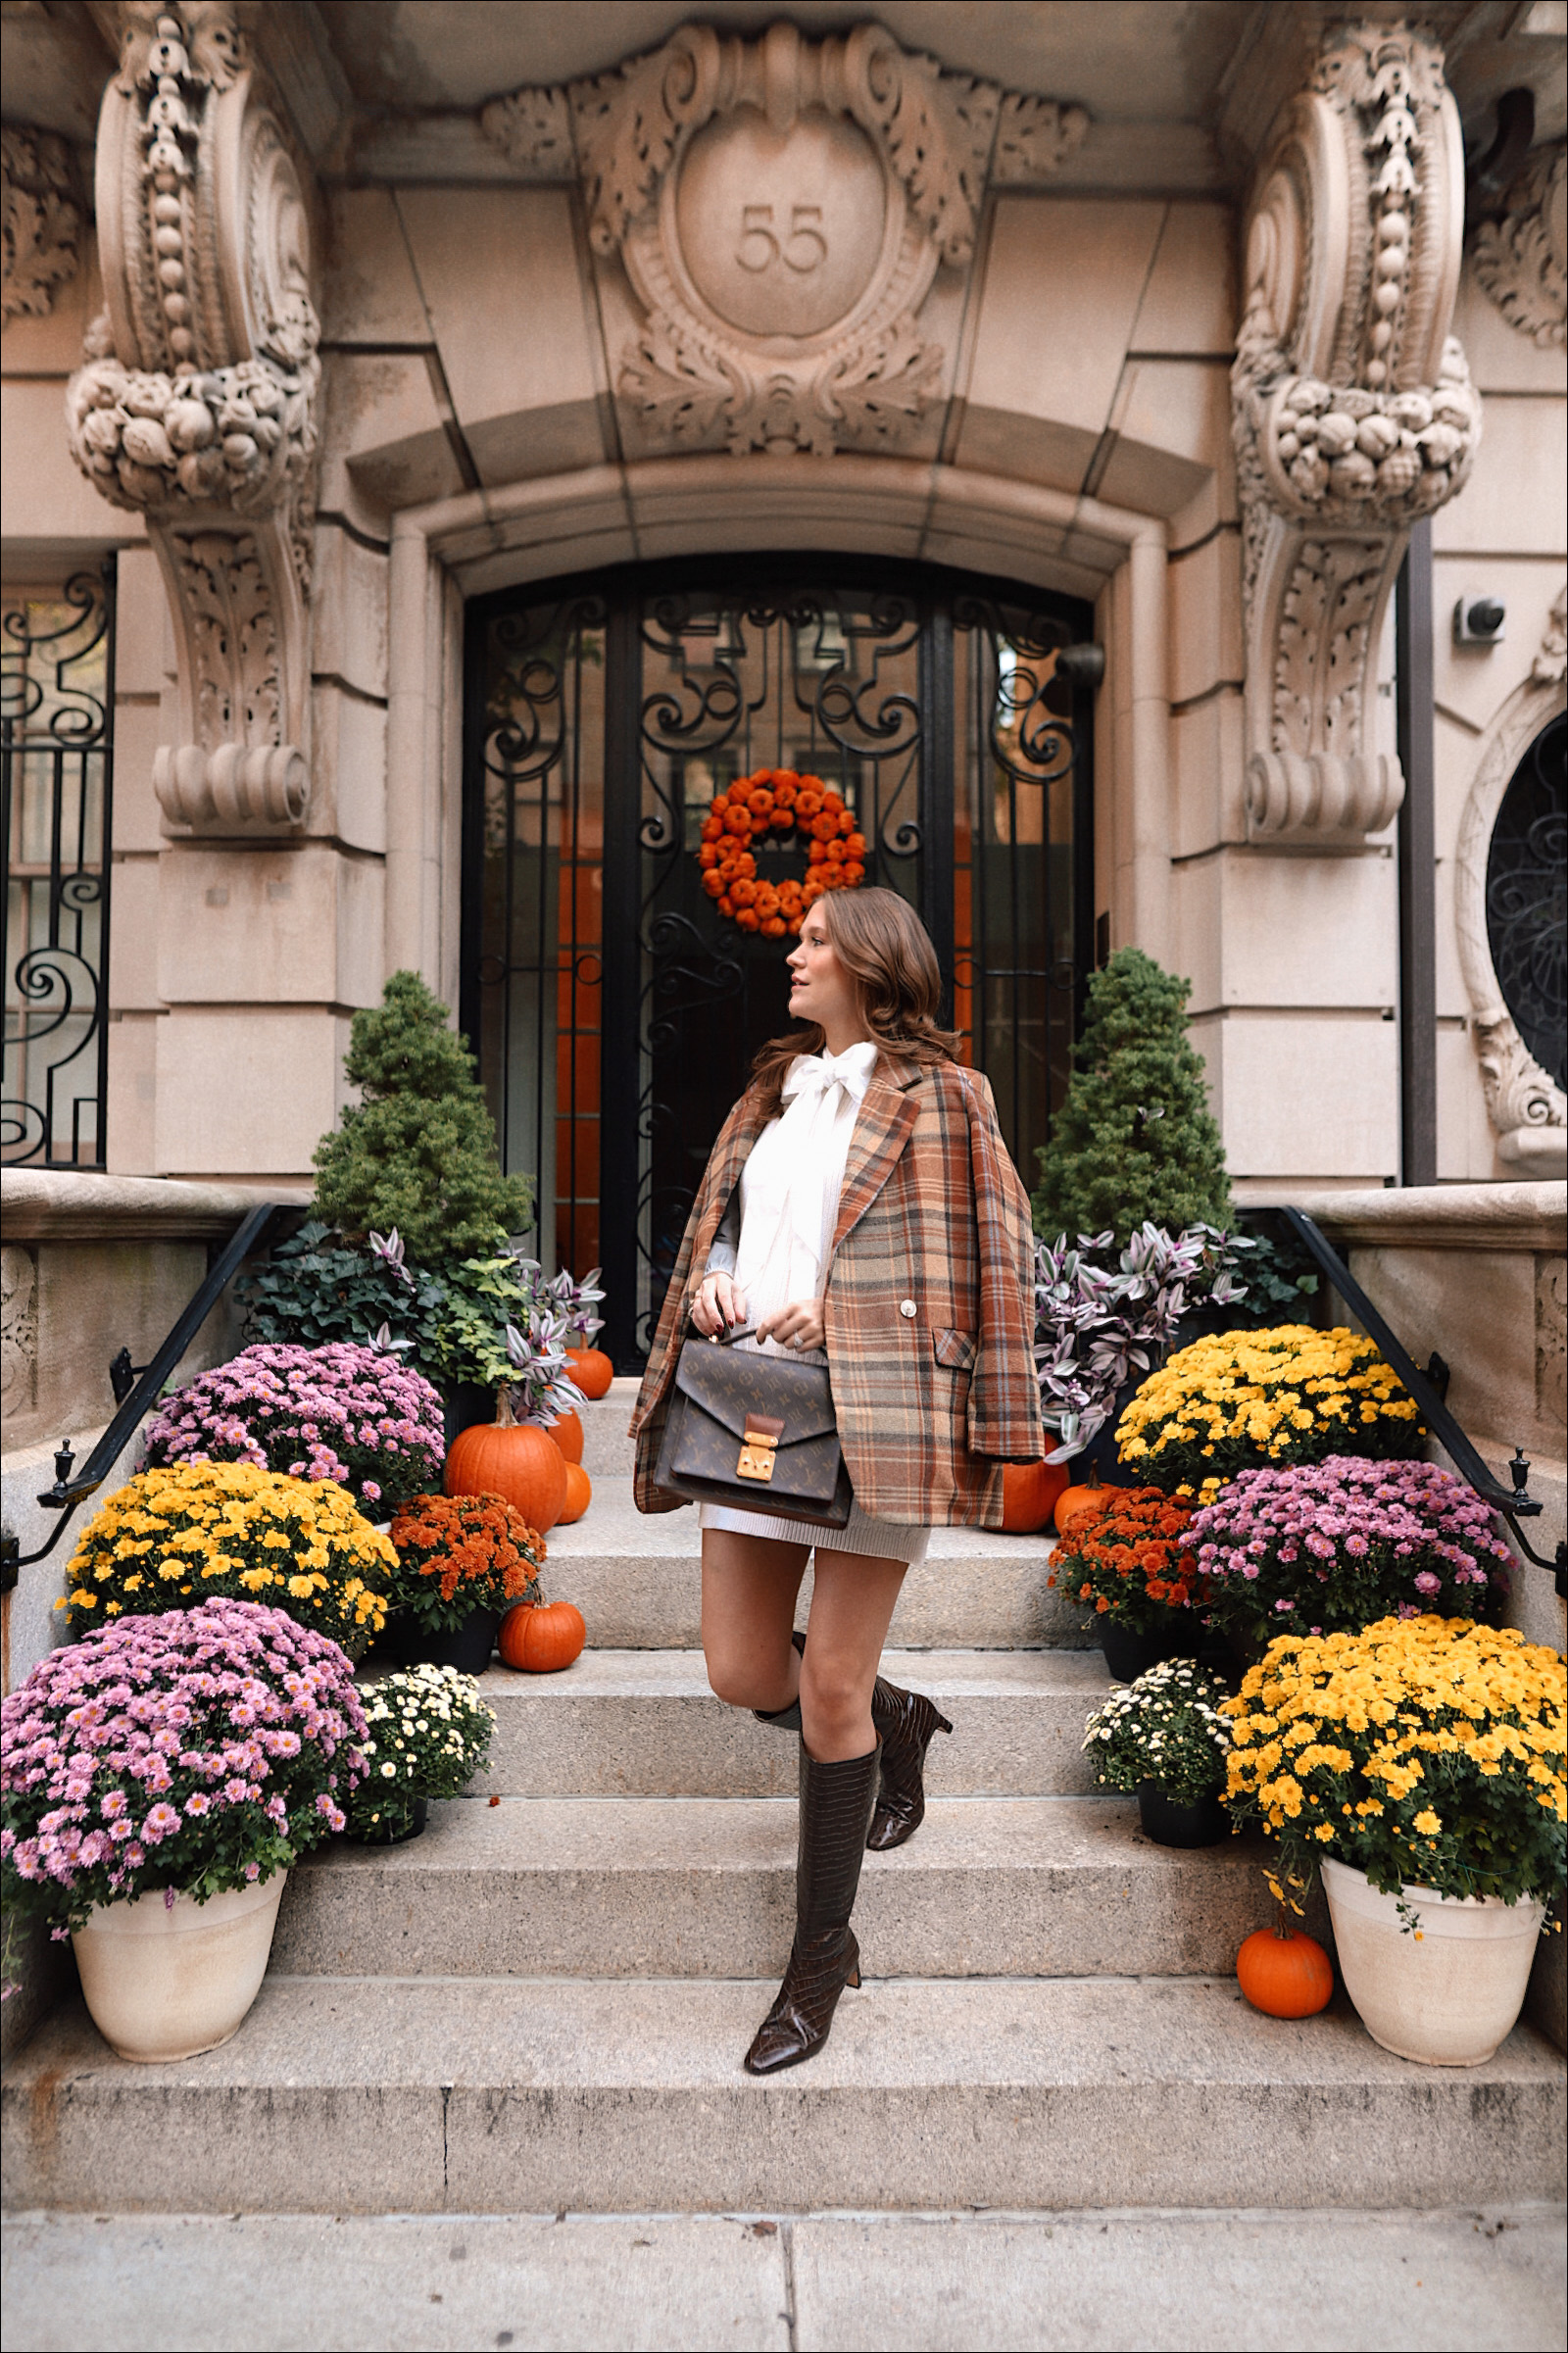 Anna on steps in New York City with fall flowers on the stairs.